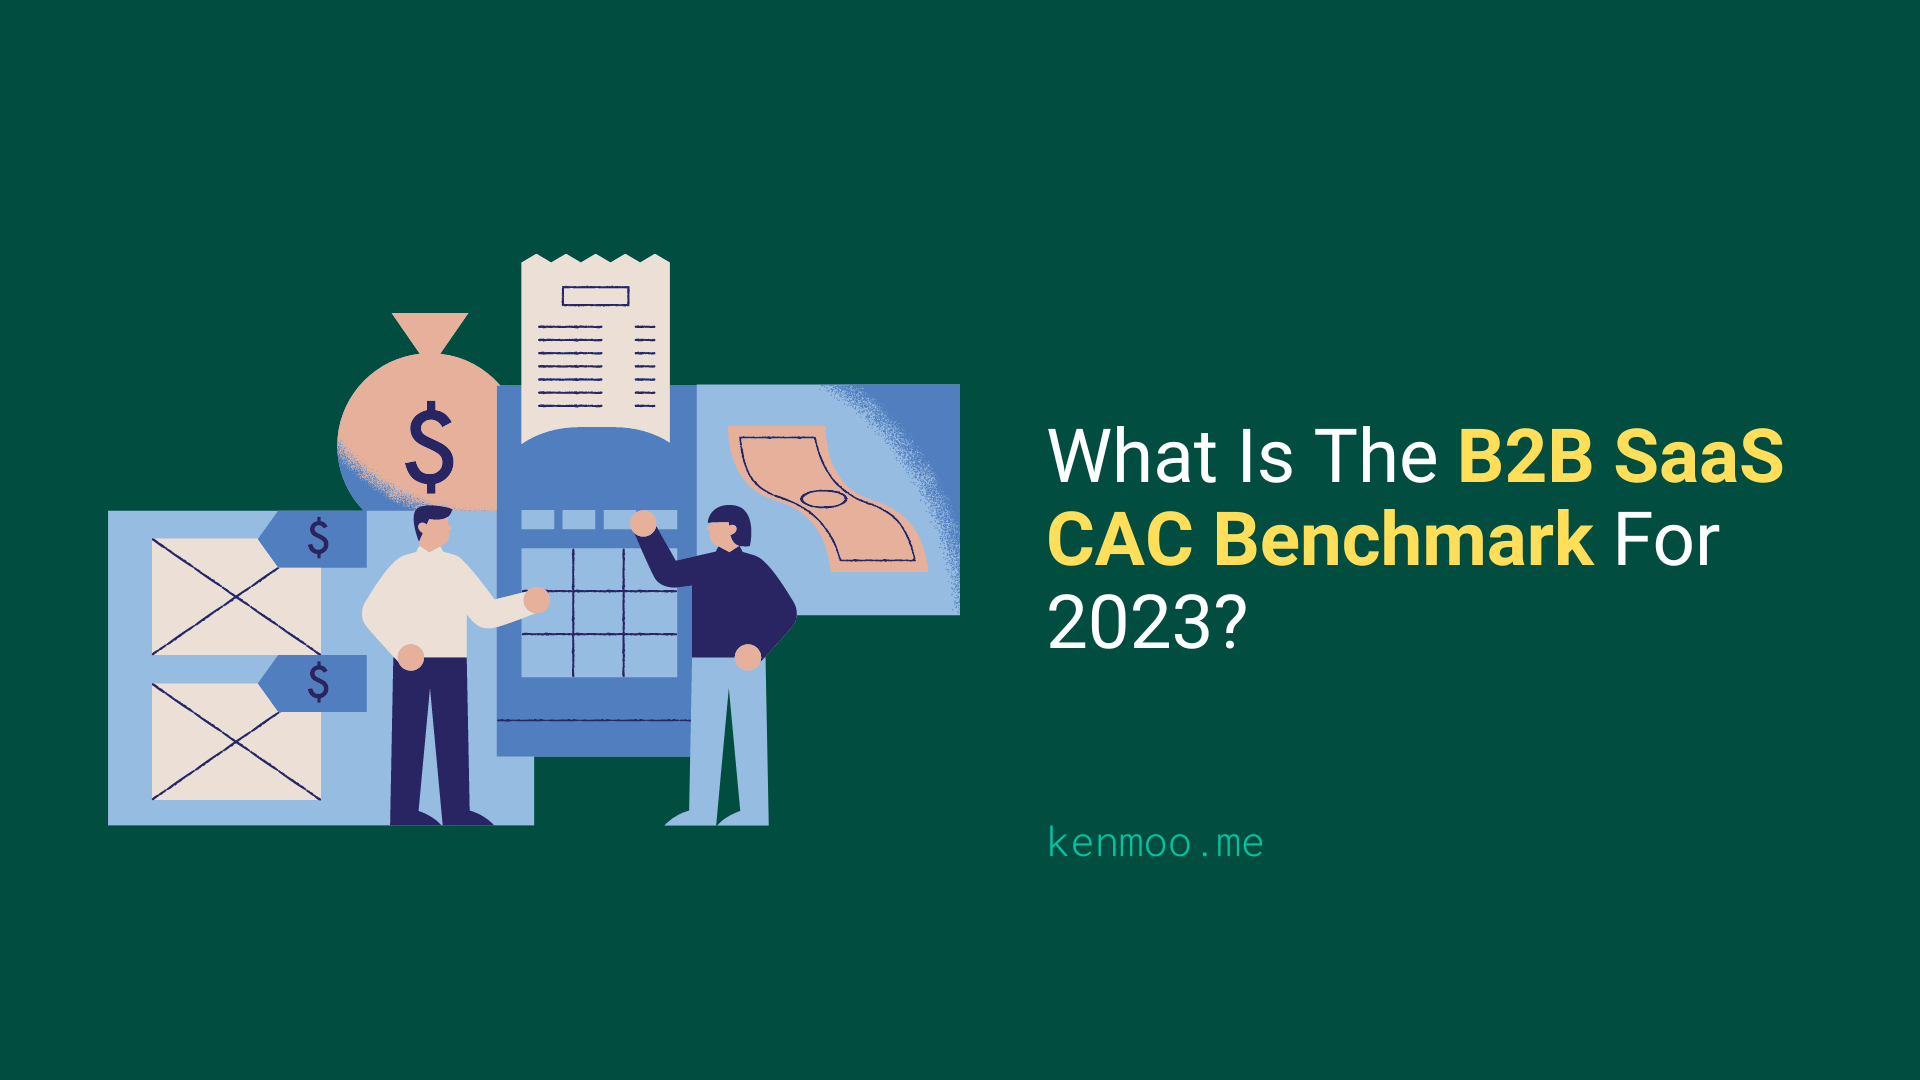 What Is The B2B SaaS CAC Benchmark For 2023?